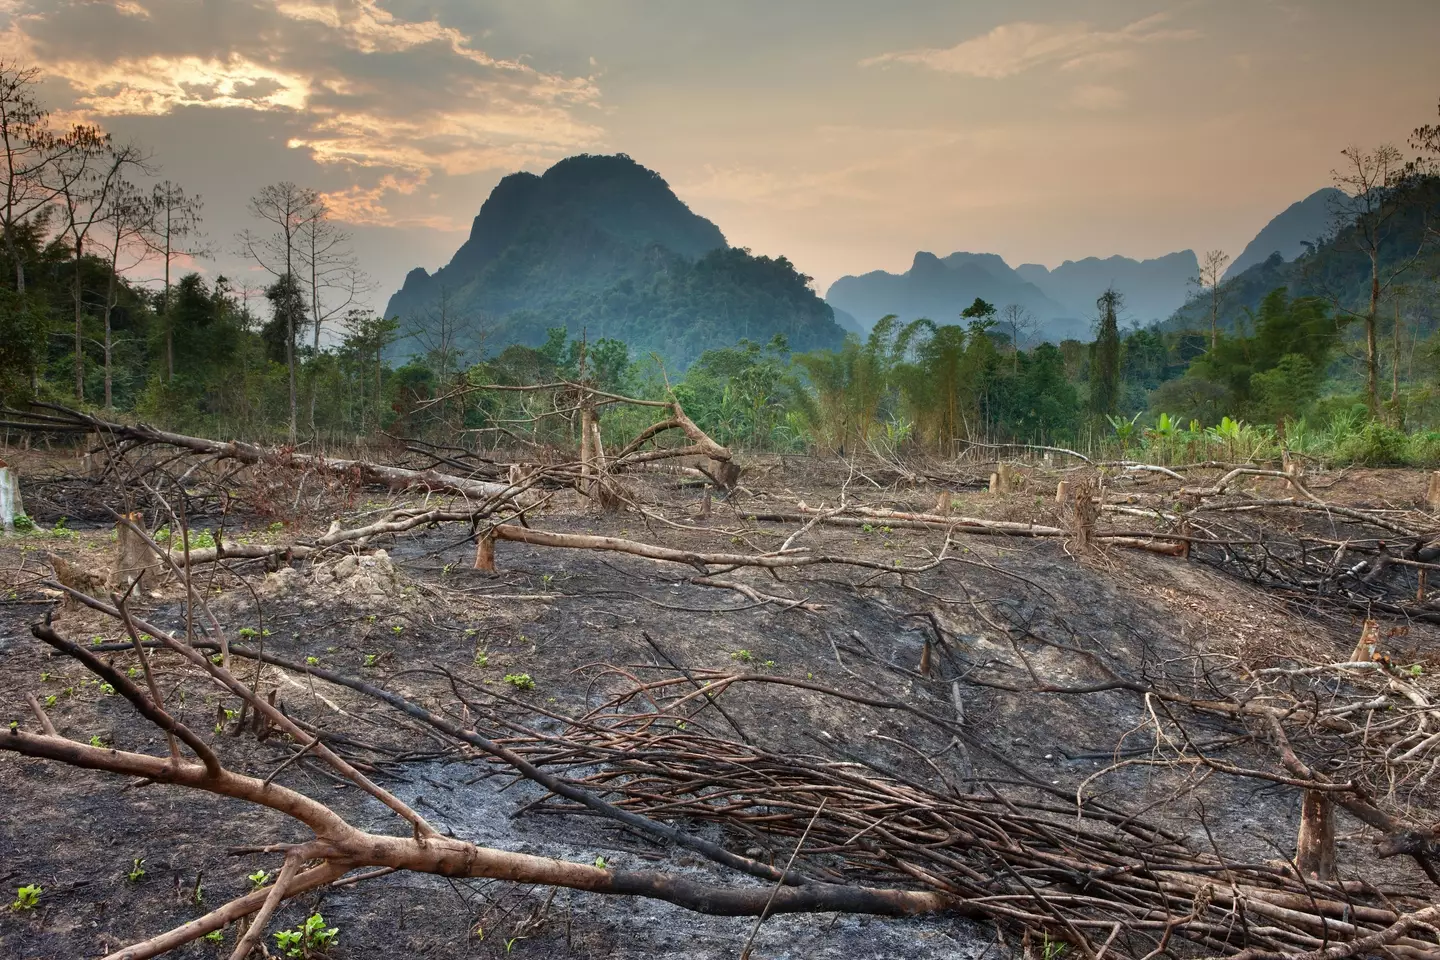 Deforestation is driving the current extinction event.